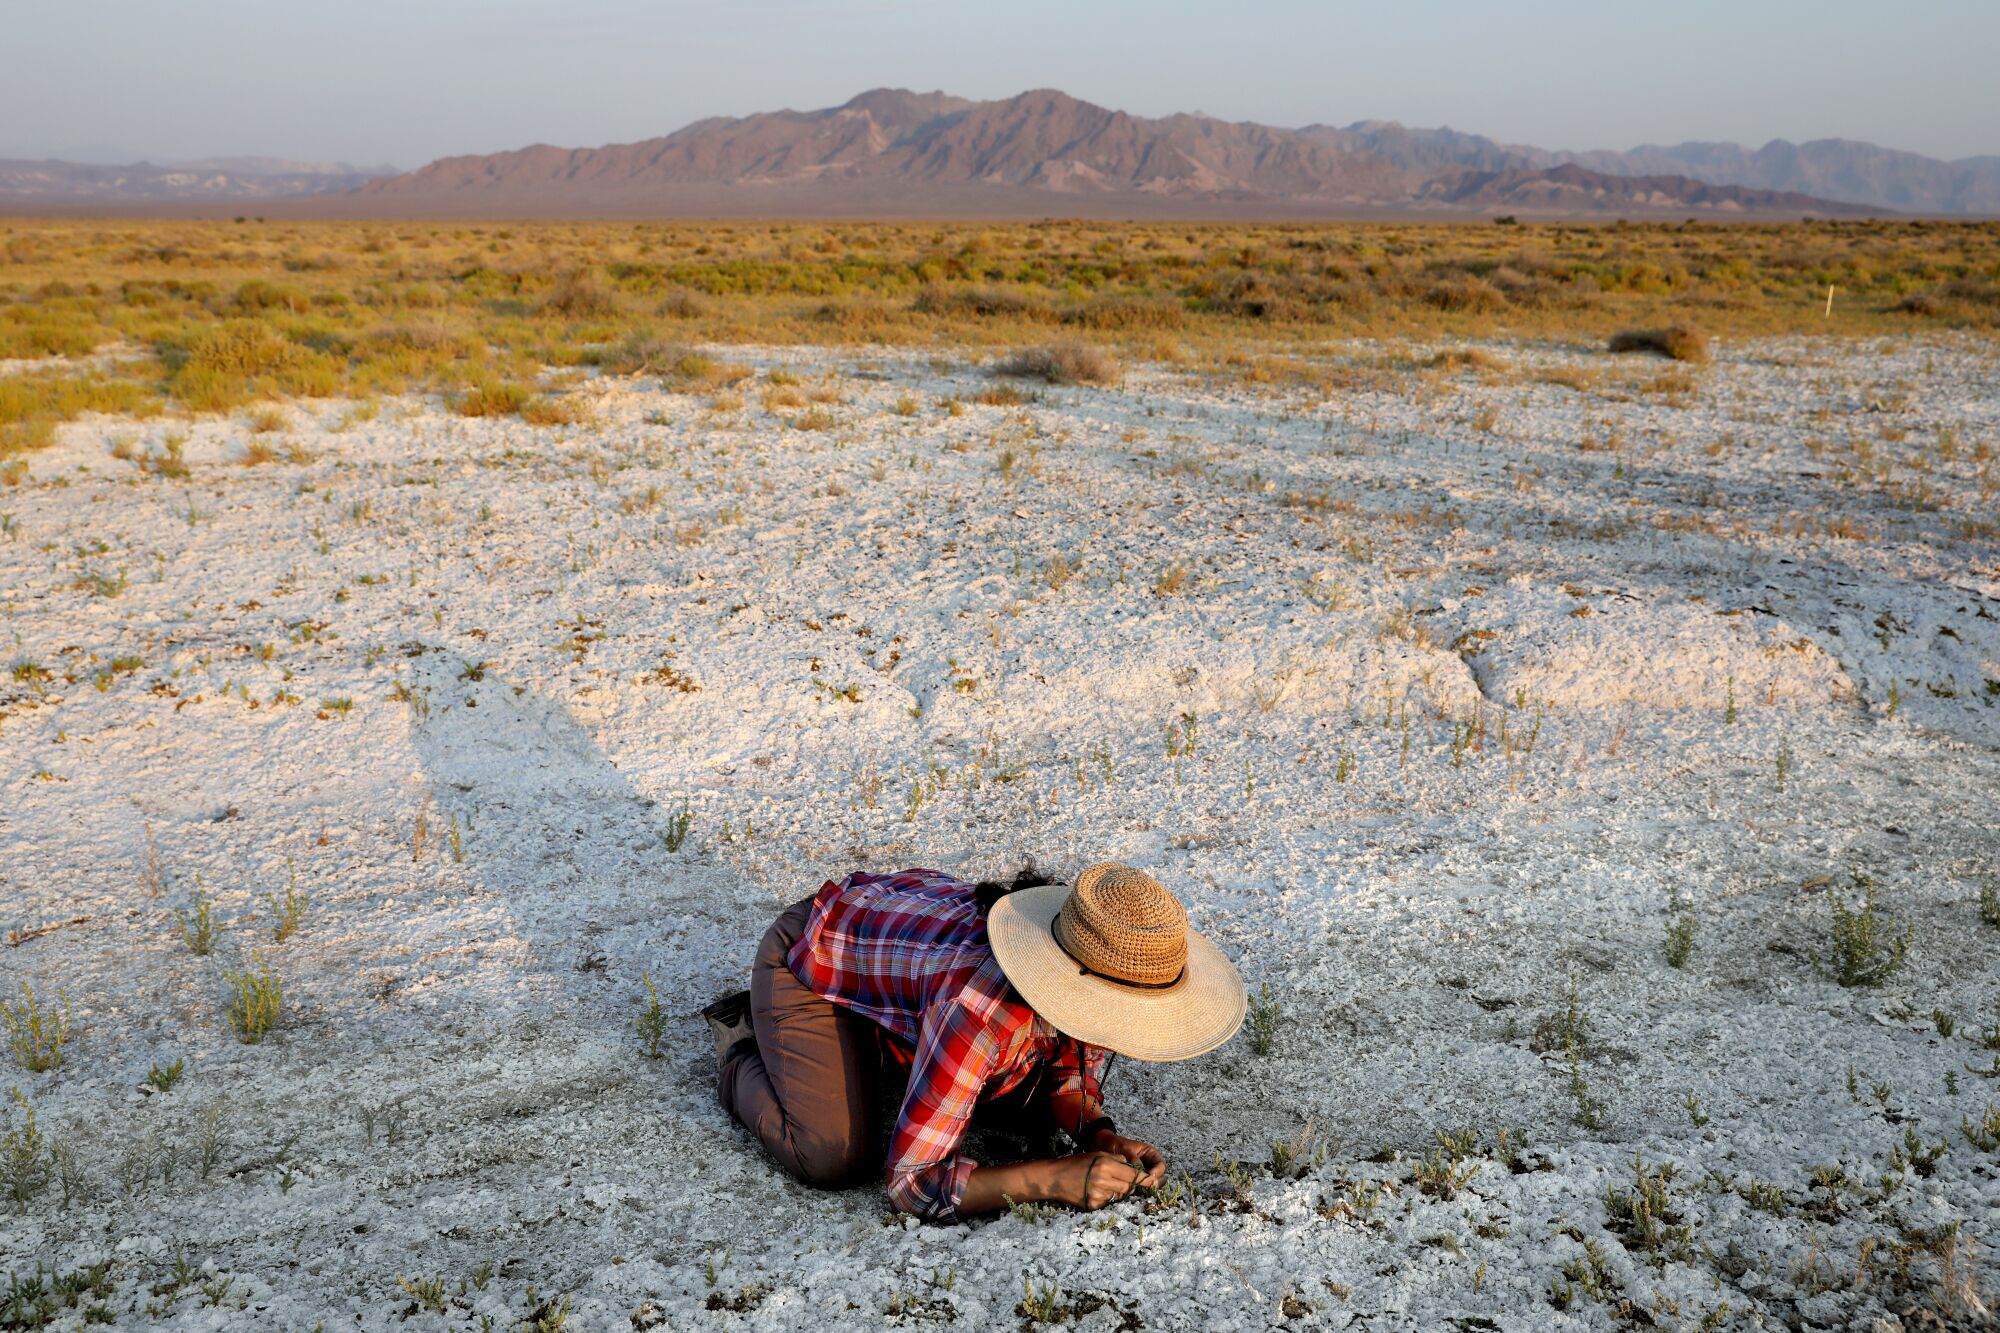 July 14: A person in a brimmed hat on their knees near small plants in salt crust